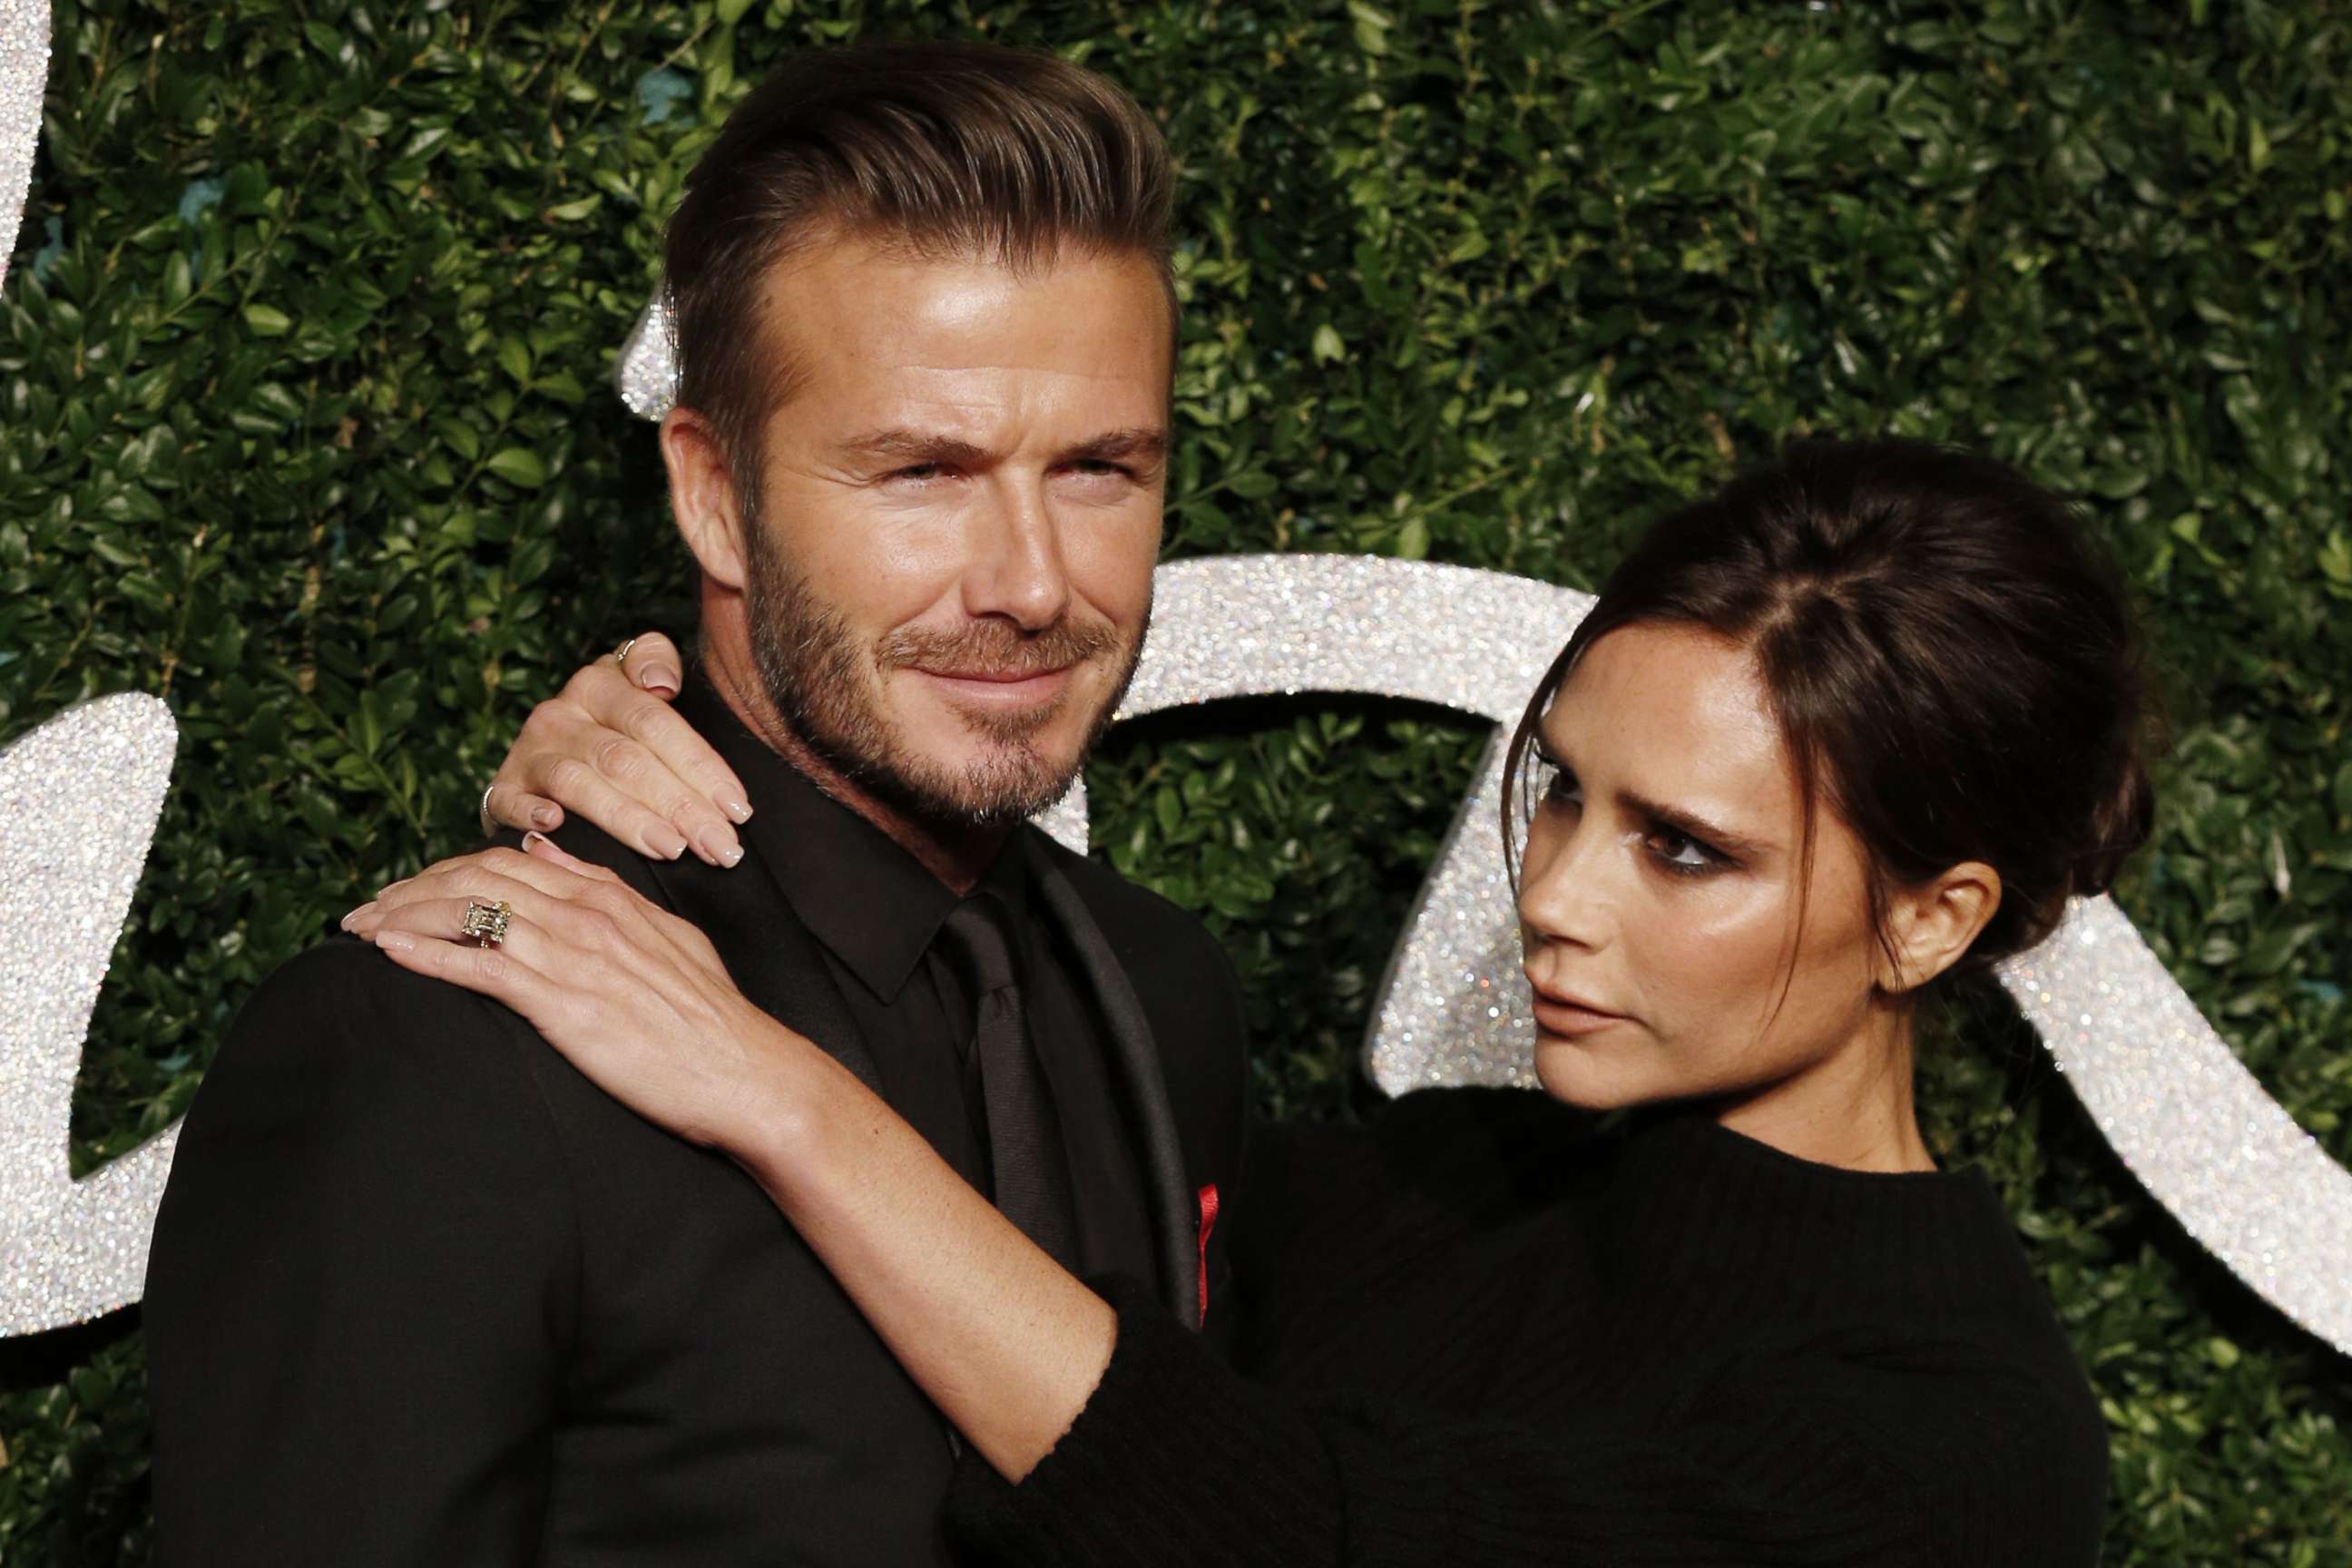 PHOTO: David Beckham and his wife Victoria pose for pictures on the red carpet upon arrival to attend the British Fashion Awards 2014 in London on Dec. 1, 2014.